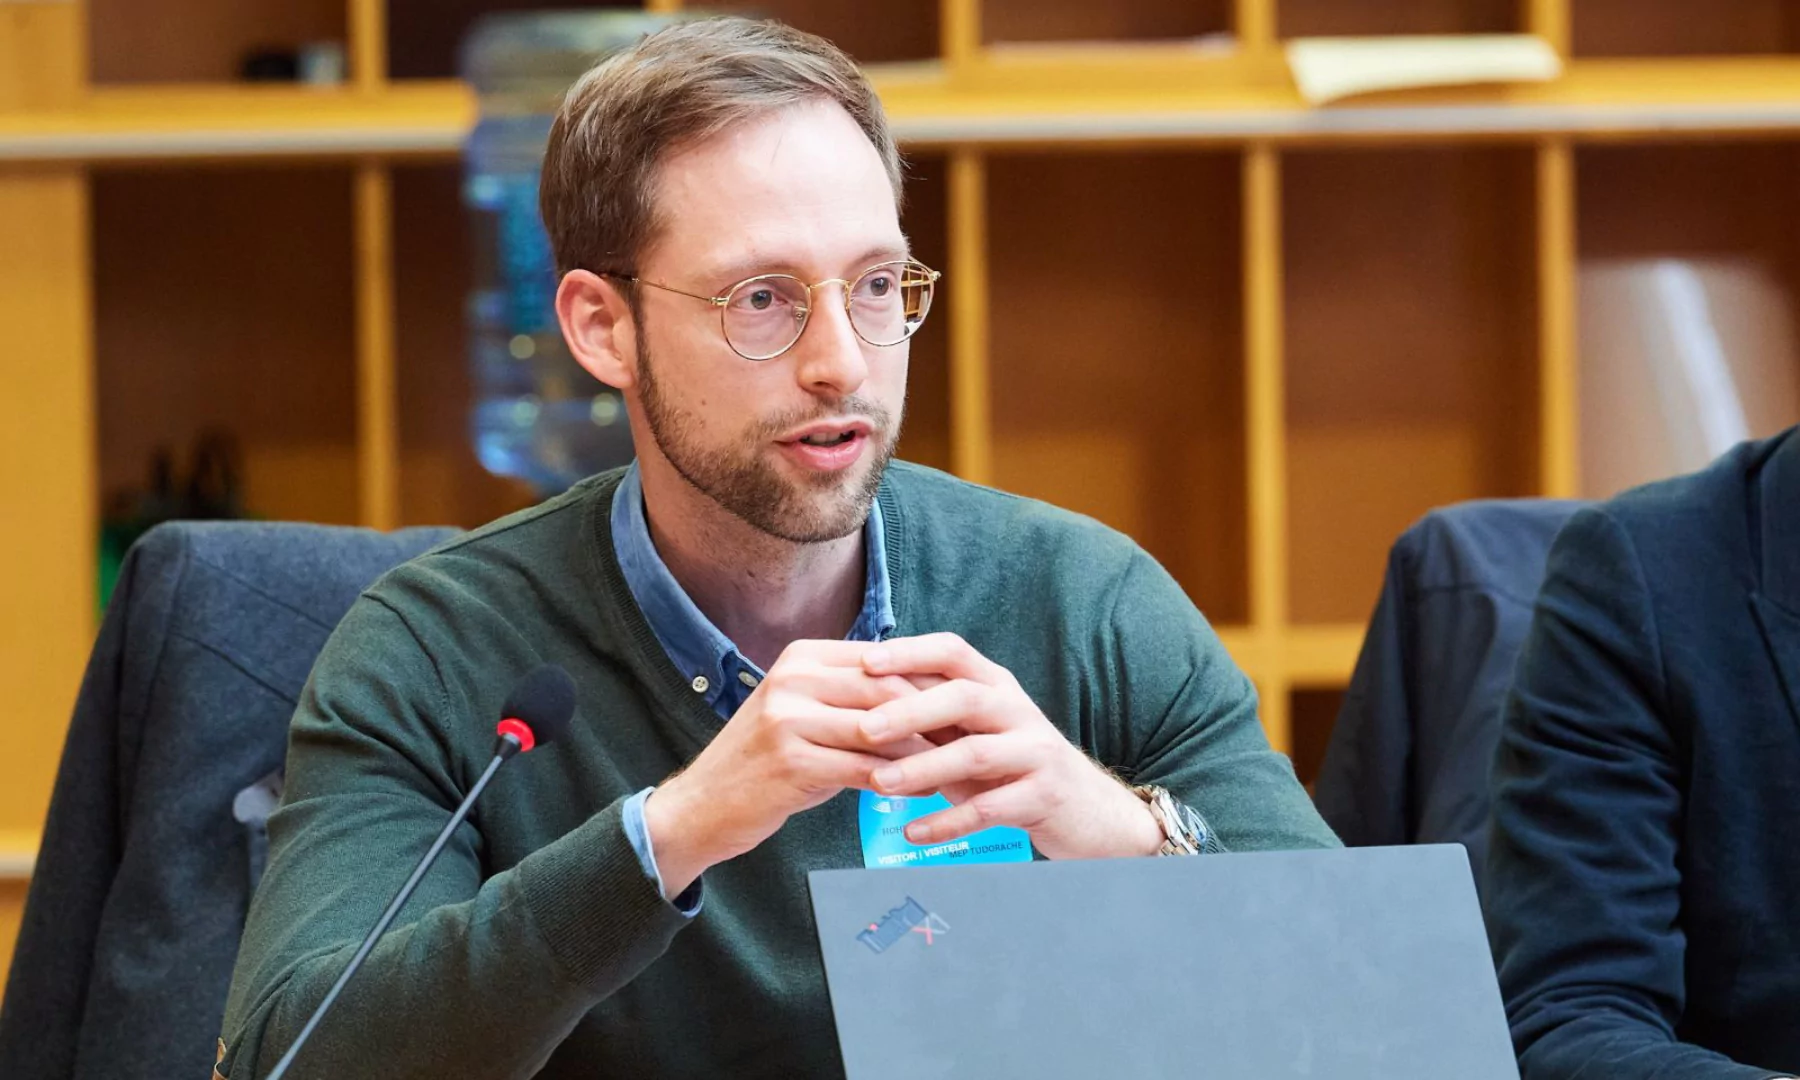 Christoph Hohenberger spoke at the AI and Data Ethics conference in Brussels in March 2023